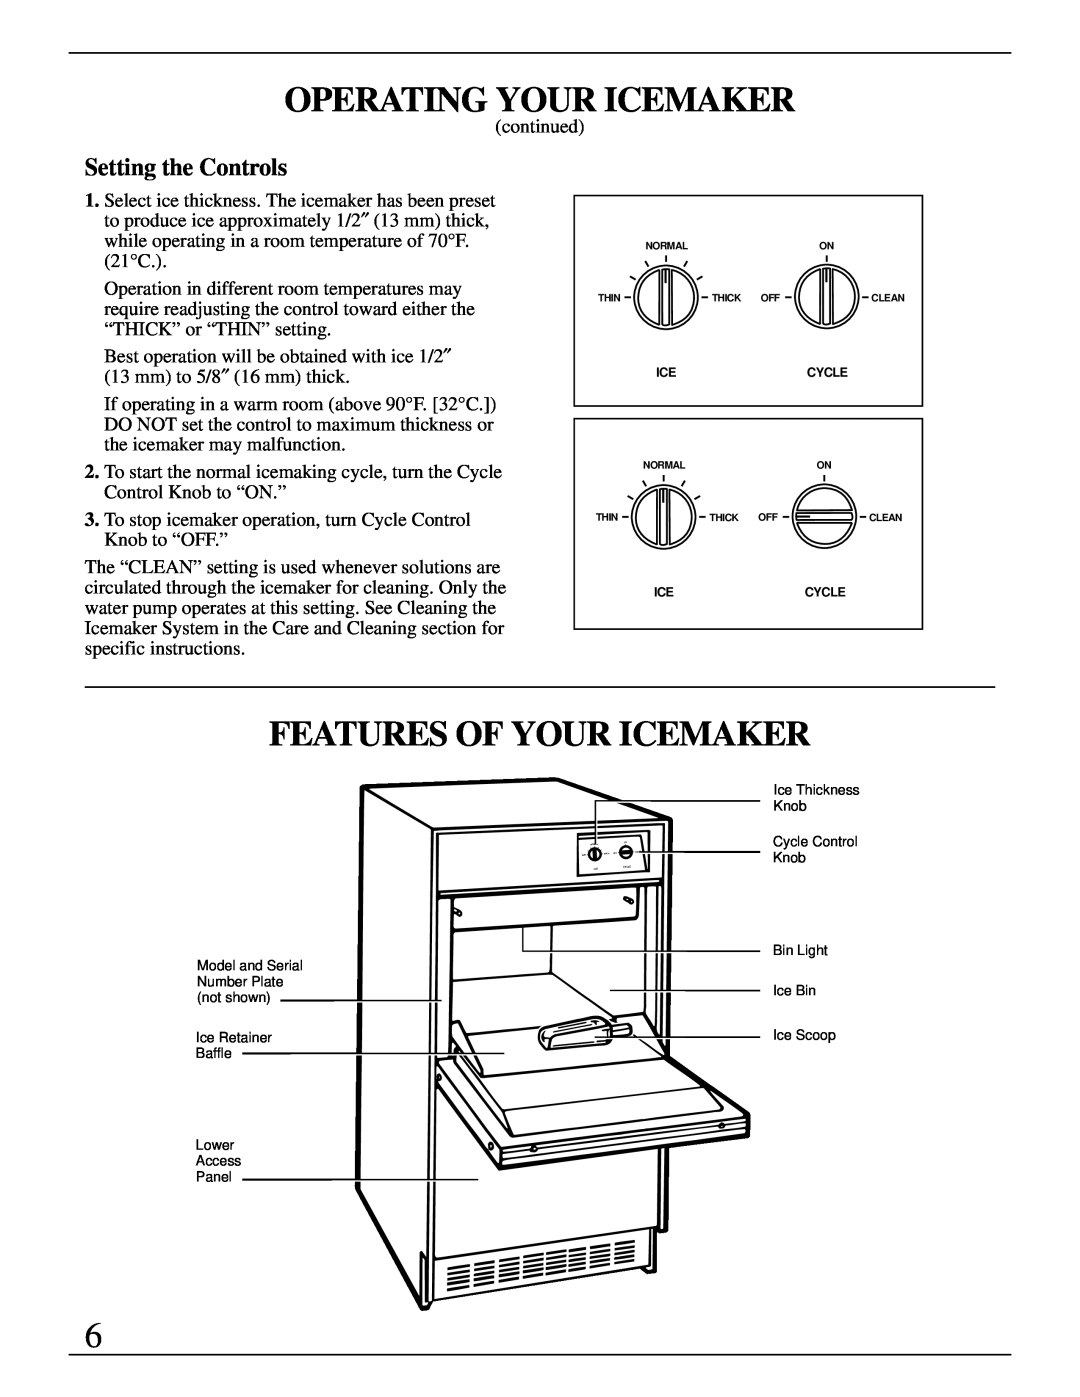 GE Monogram ZDIW50 installation instructions Features Of Your Icemaker, Setting the Controls, Operating Your Icemaker 